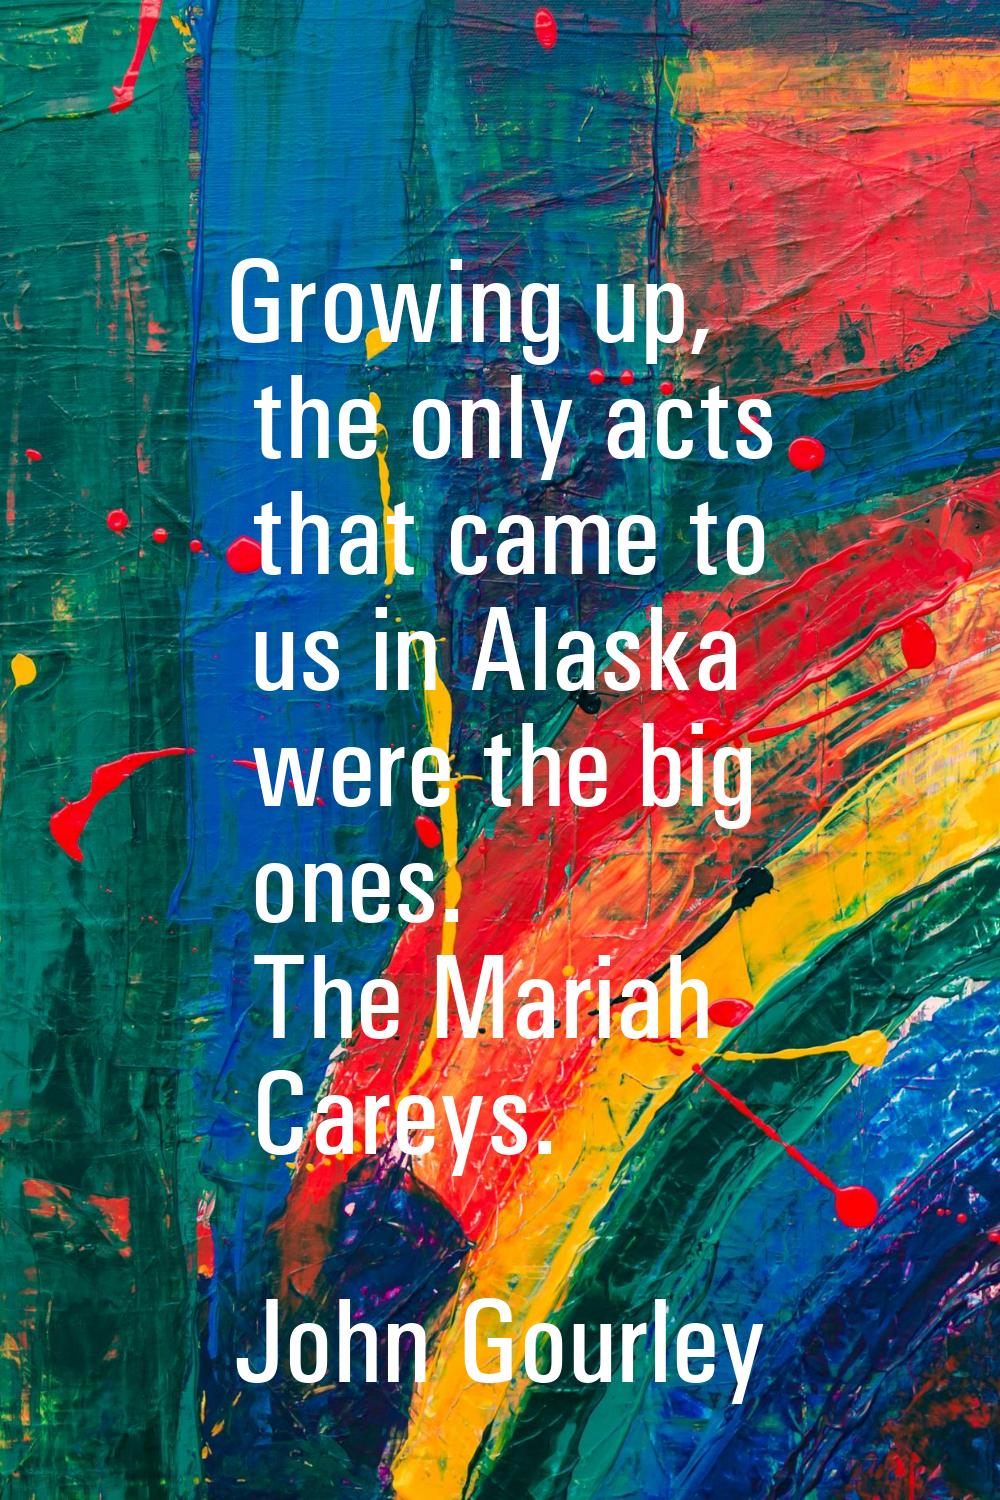 Growing up, the only acts that came to us in Alaska were the big ones. The Mariah Careys.